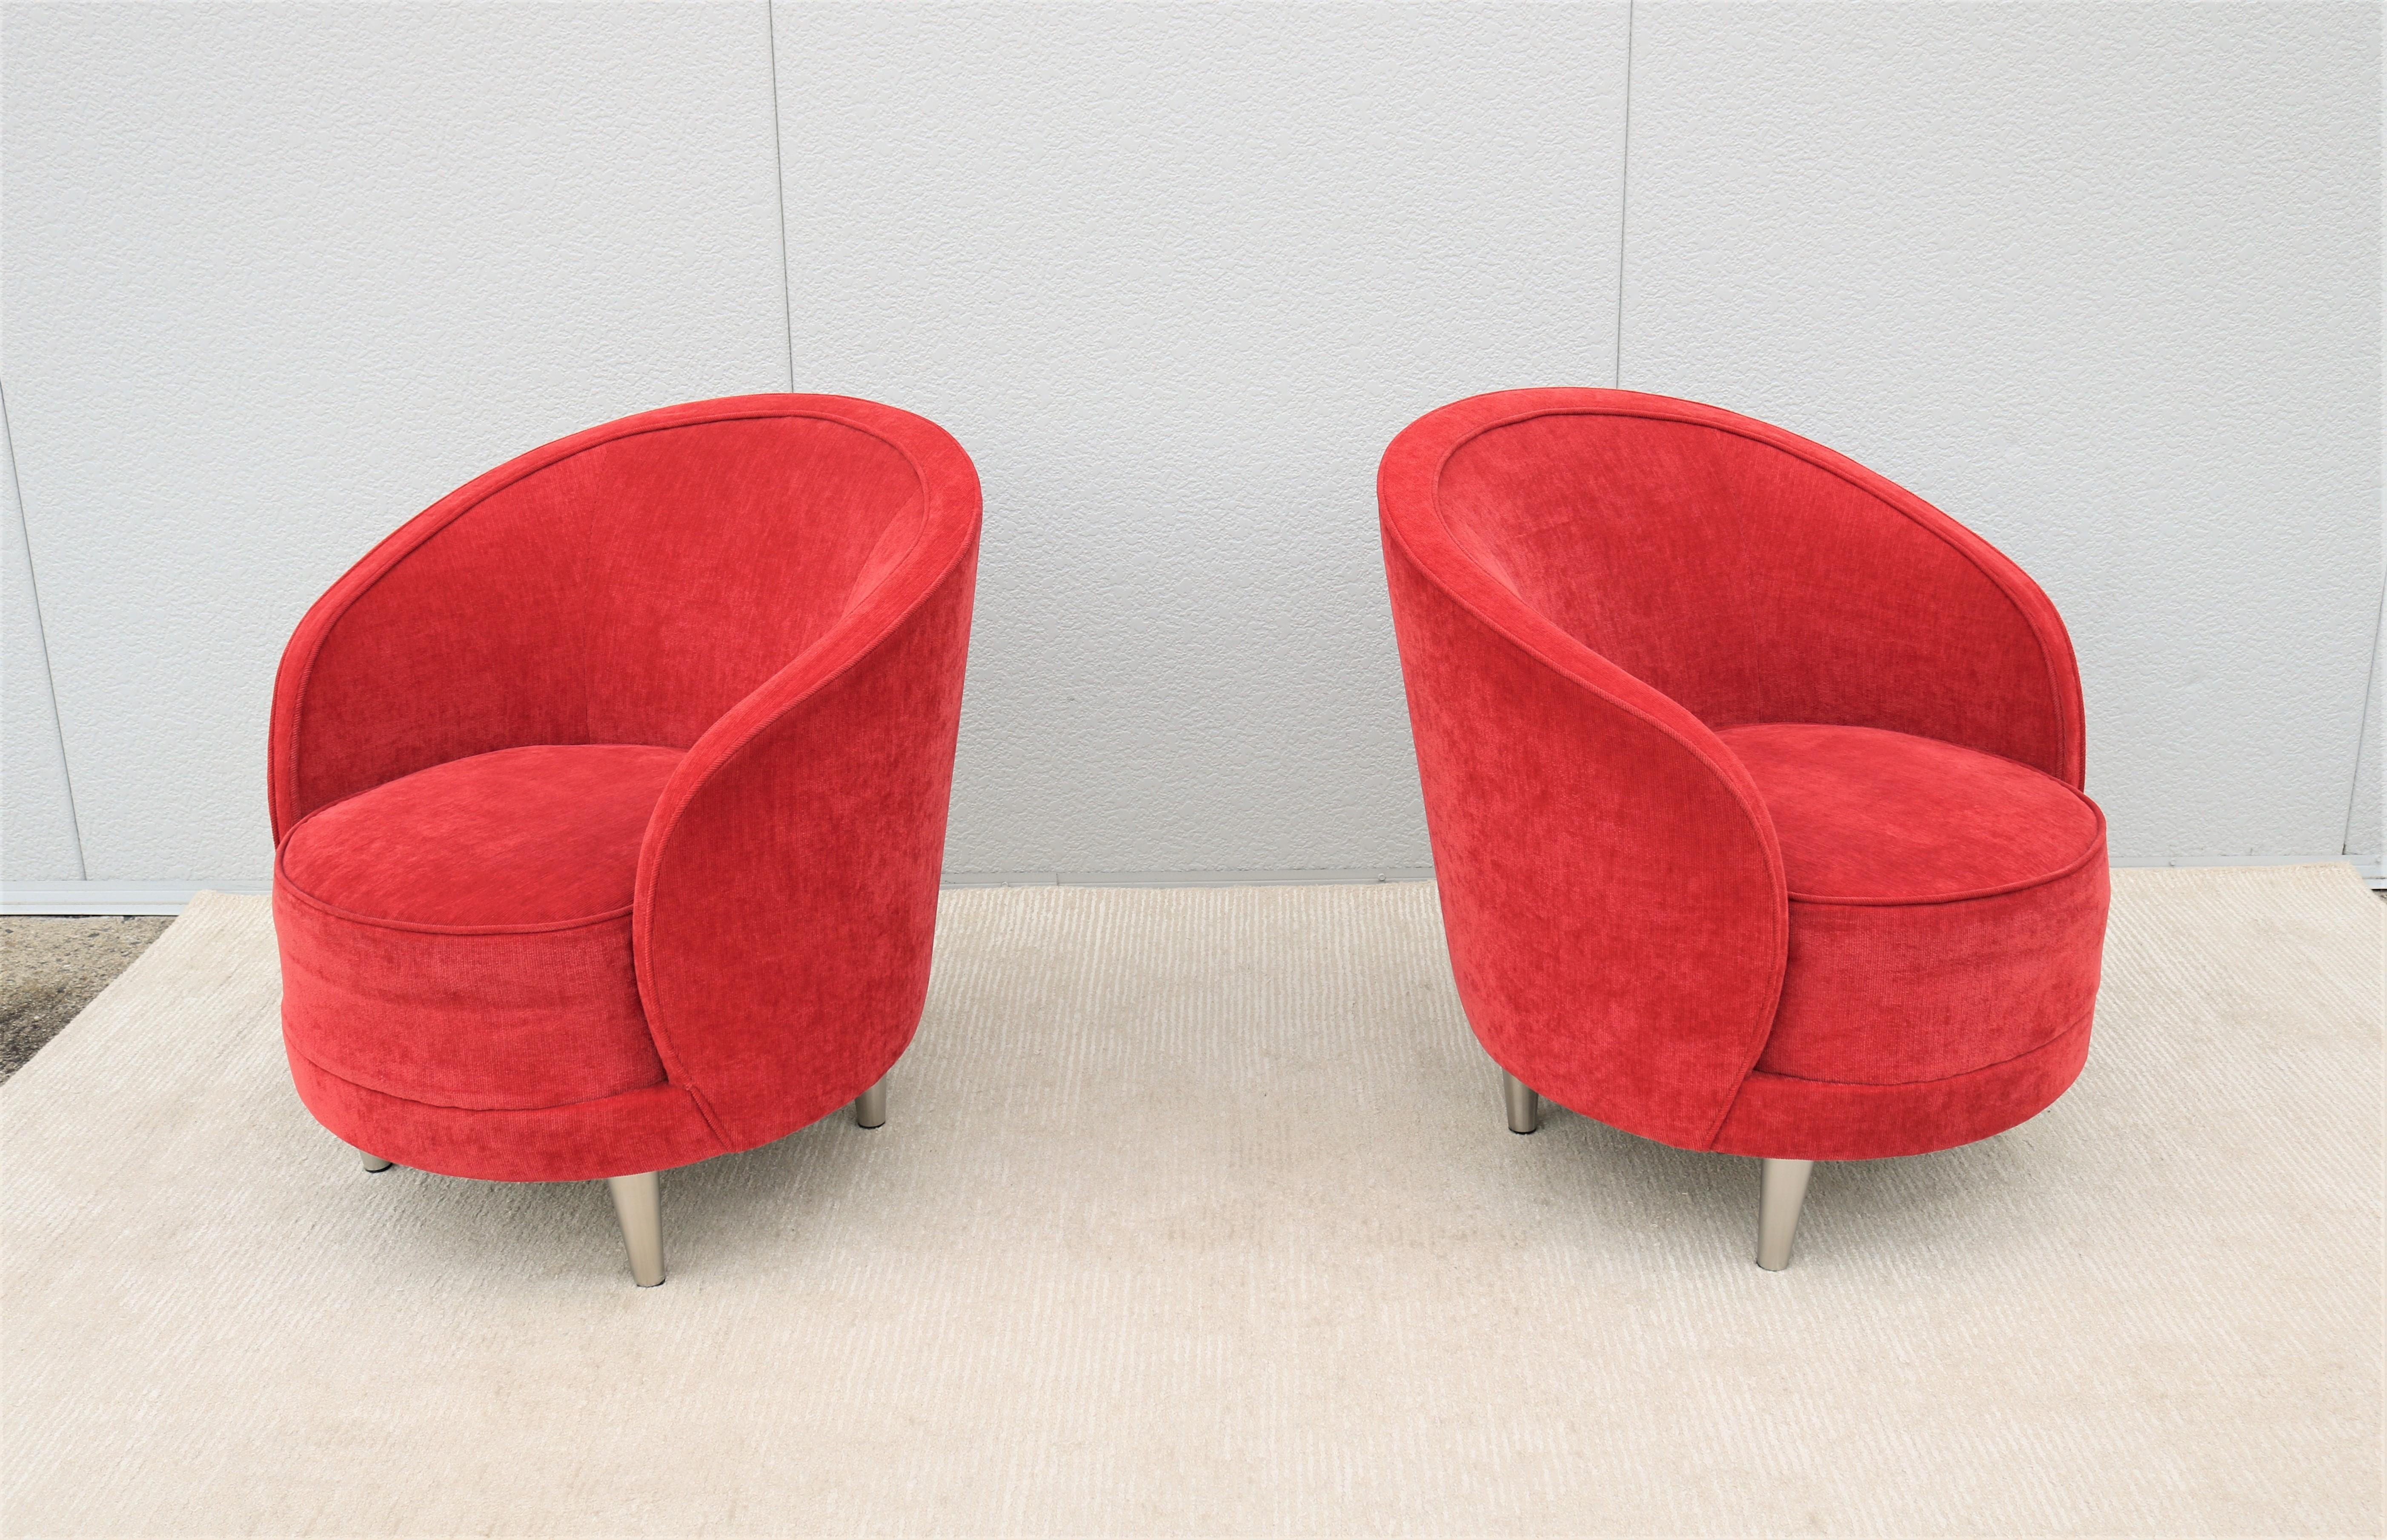 Brushed Contemporary Modern Martin Brattrud Kinsale Red Barrel Lounge Chairs, a Pair For Sale